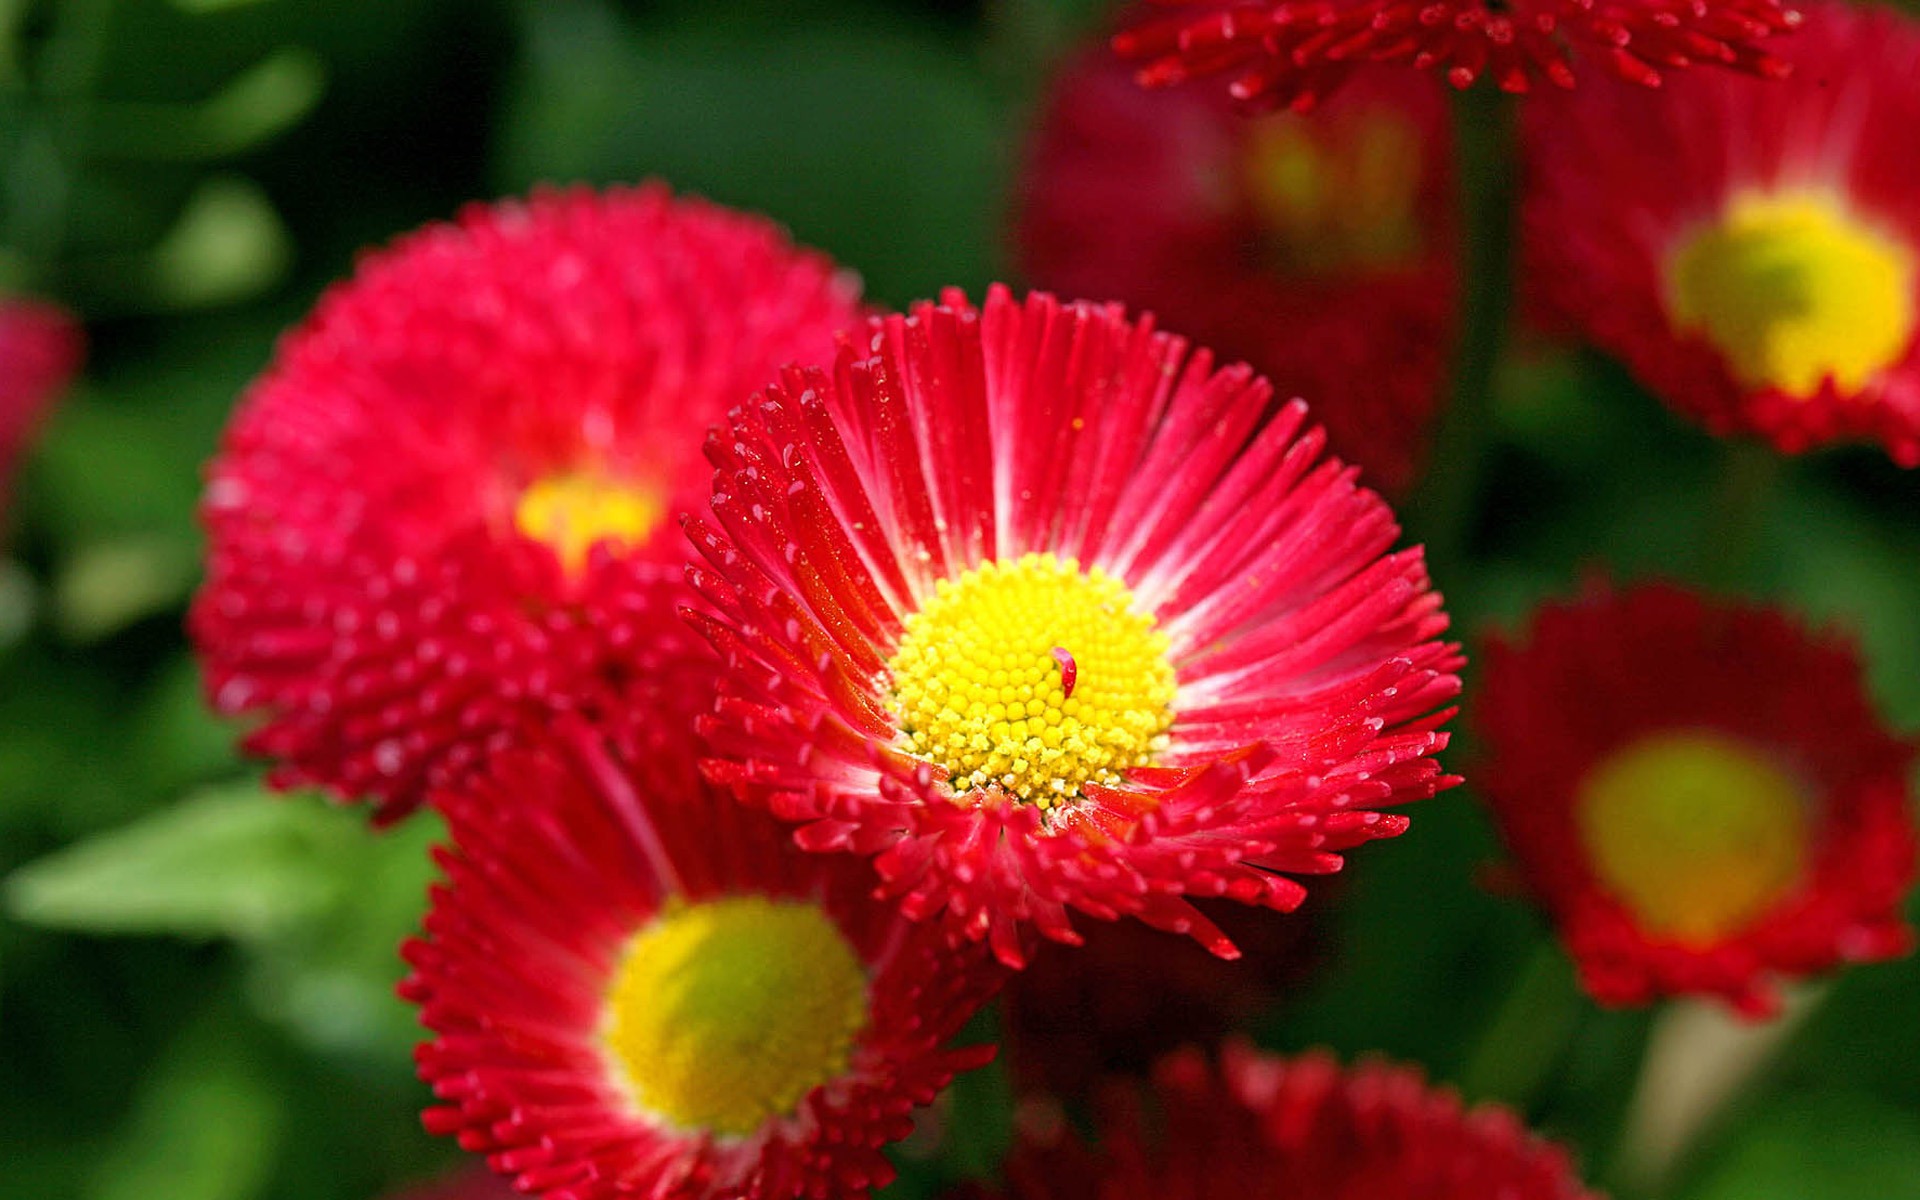 Daisies flowers close-up HD wallpapers #9 - 1920x1200